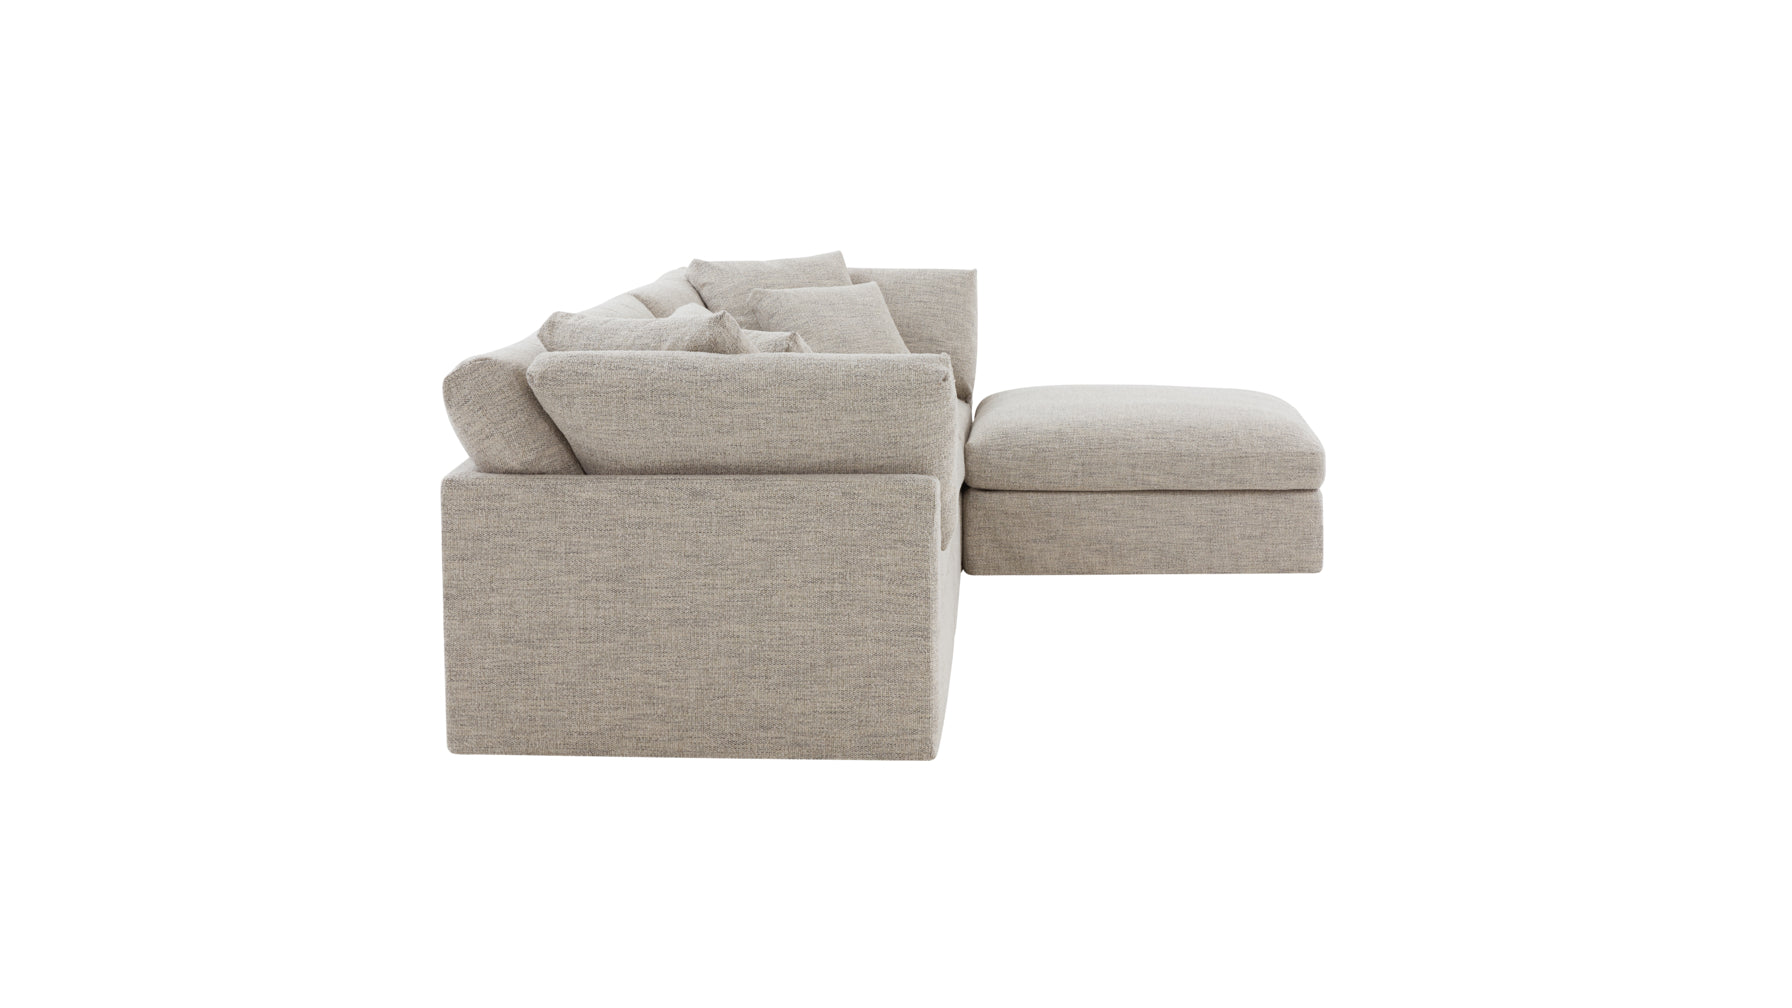 Get Together™ 4-Piece Modular Sectional, Large, Oatmeal - Image 7